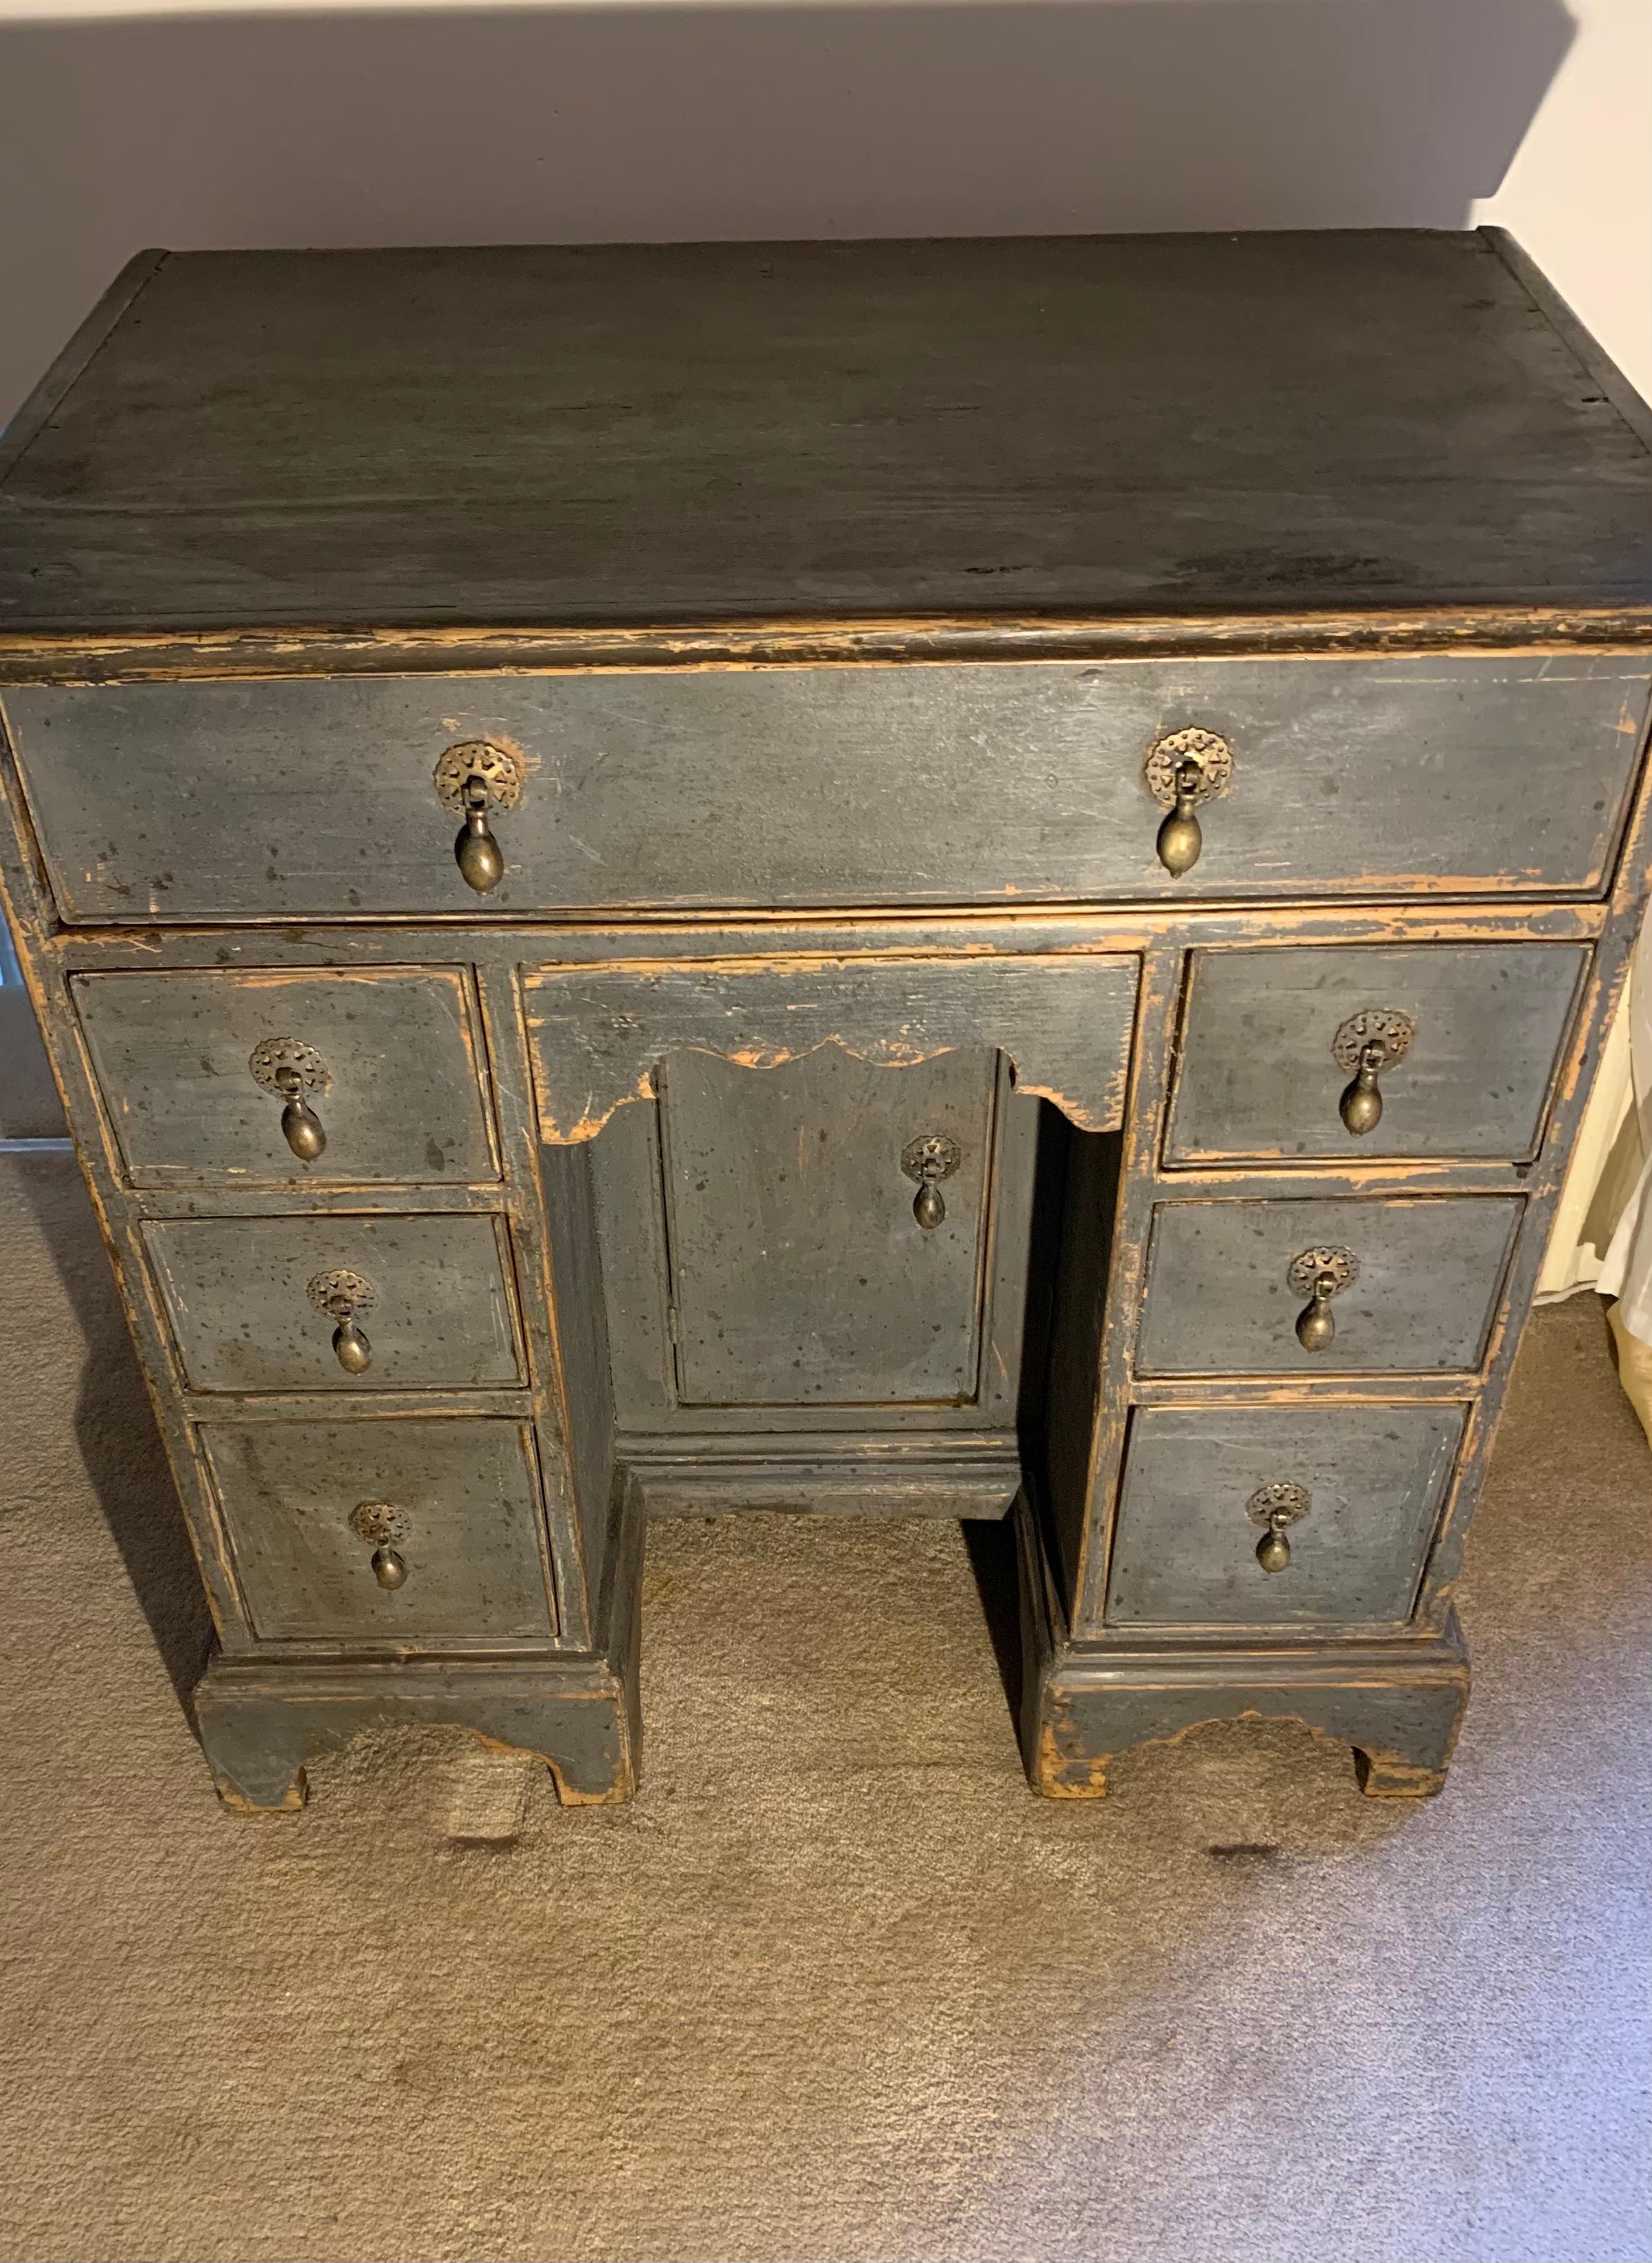 Circa 18th Century English Unusual Size Painted Knee Hole Desk or Side Table For Sale 5